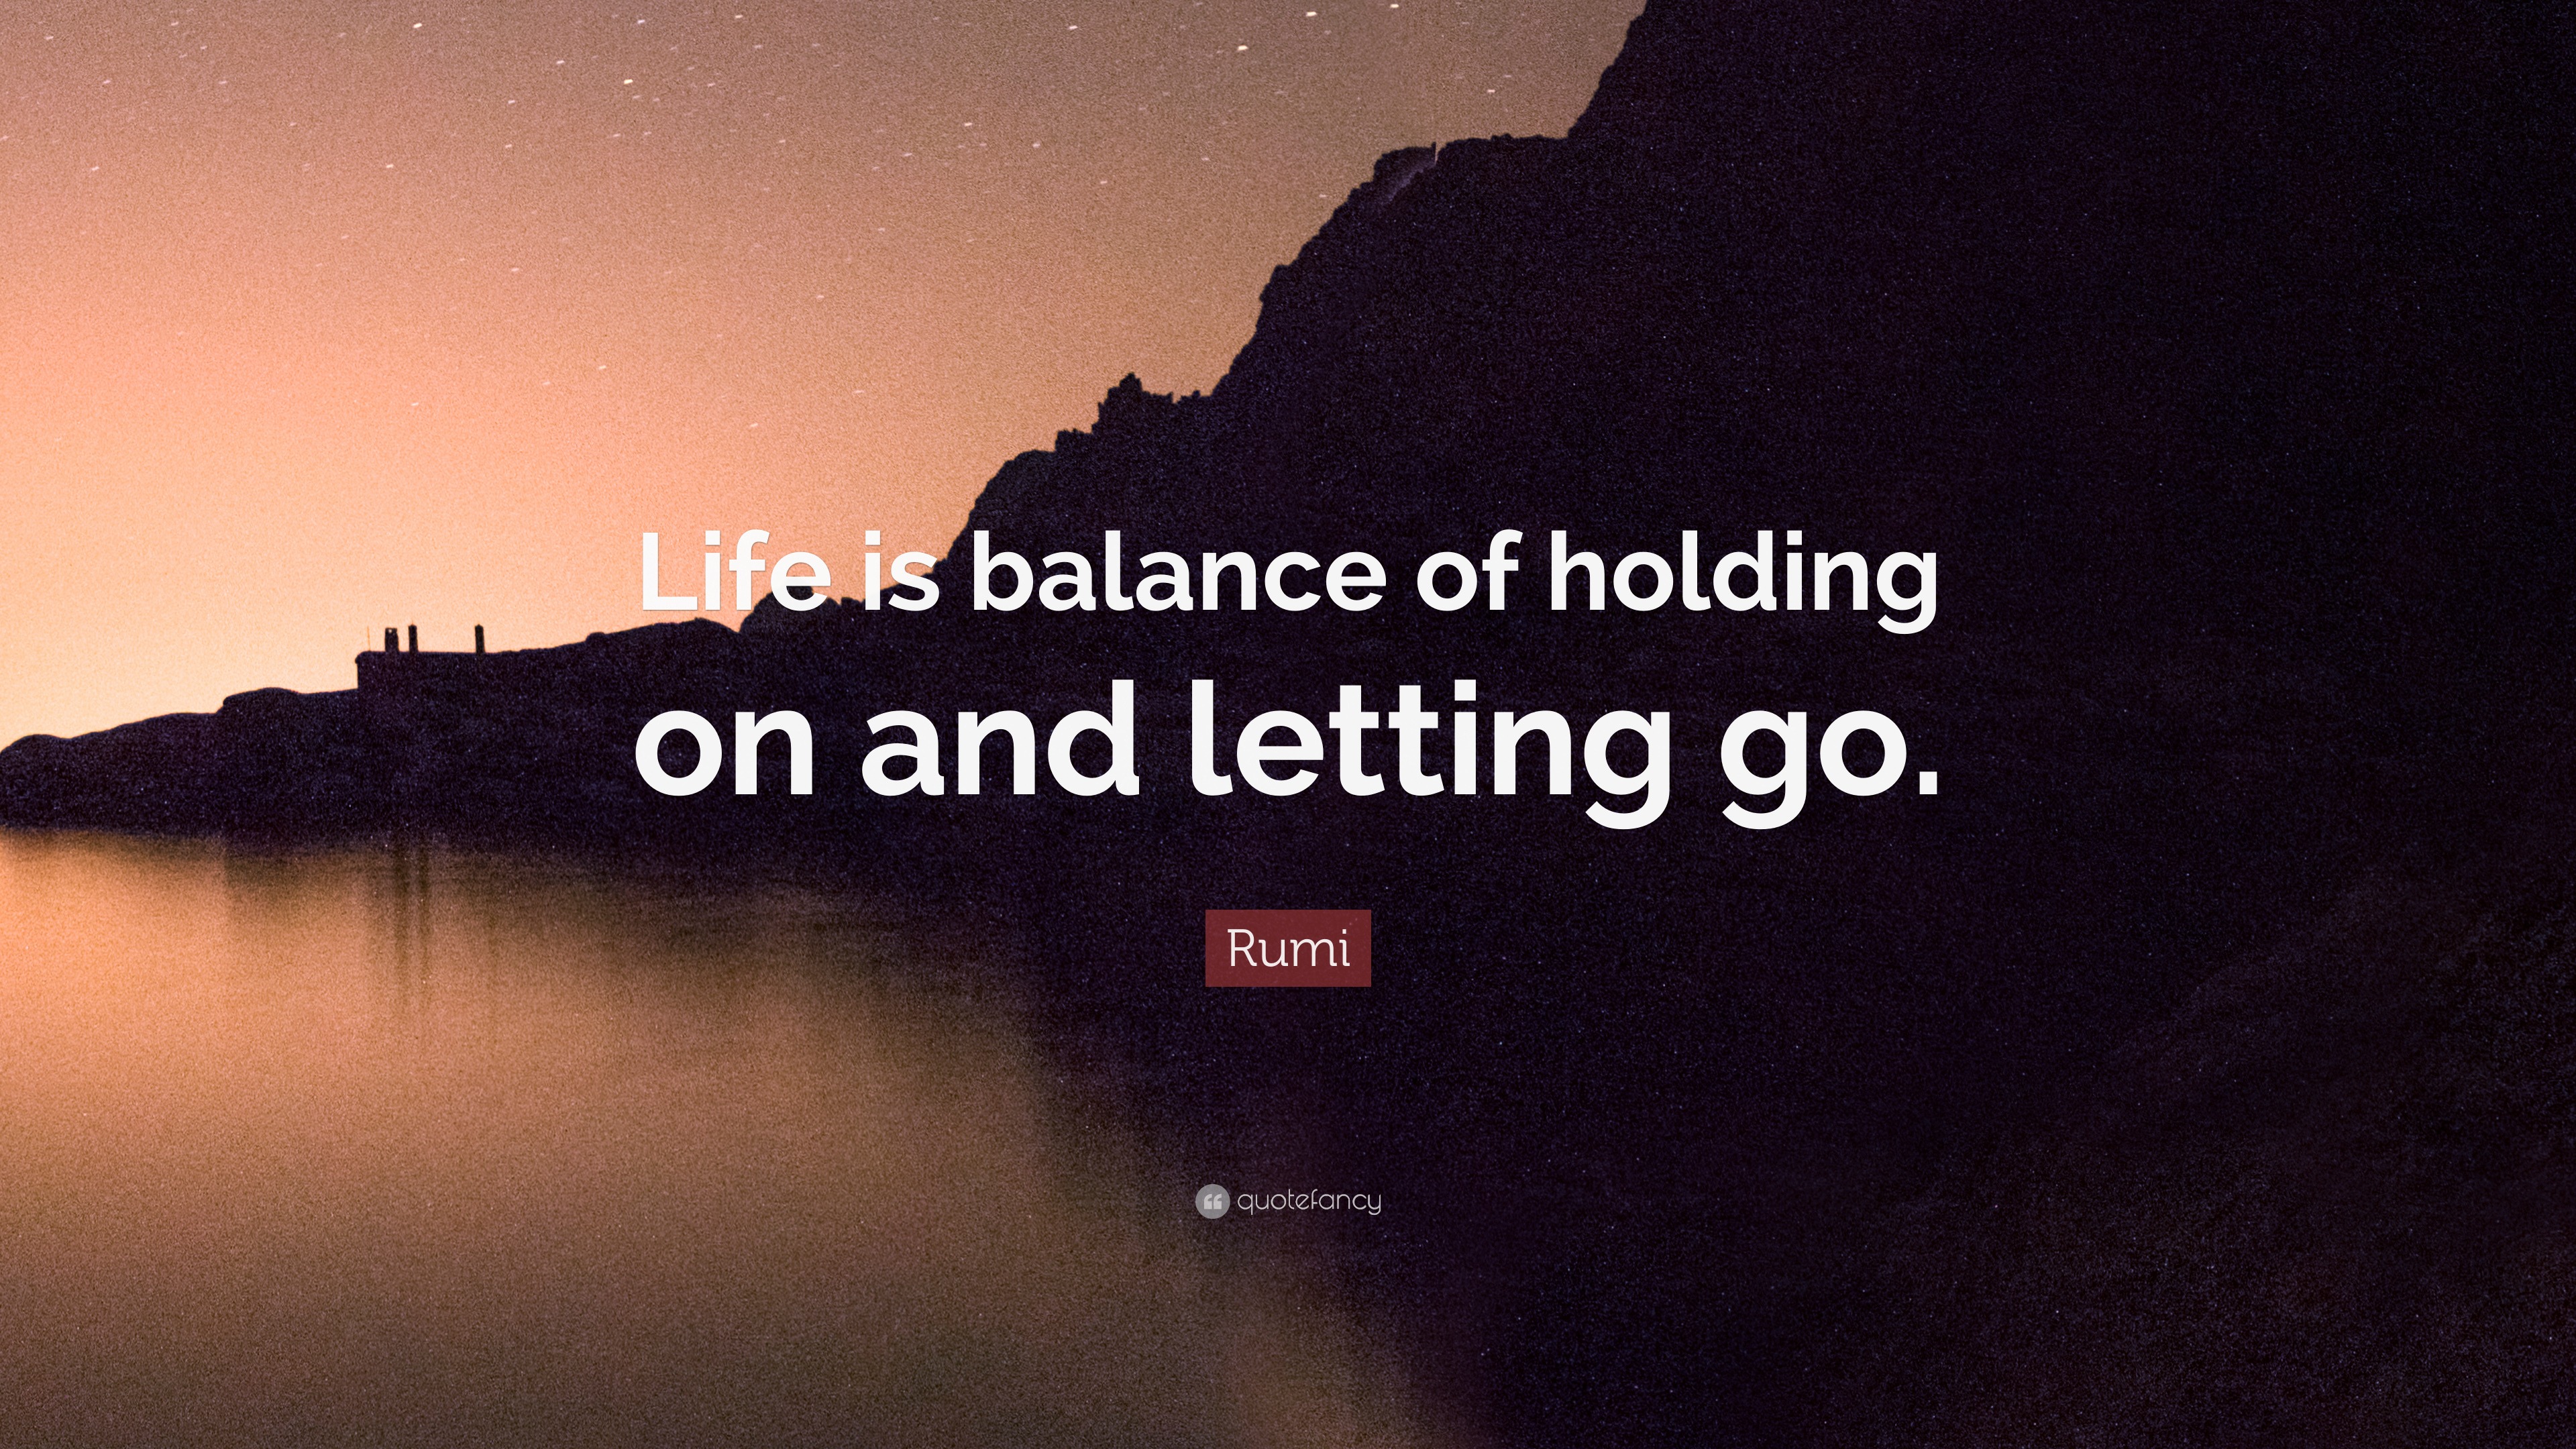 Rumi Quote: “Life is balance of holding on and letting go.” (12